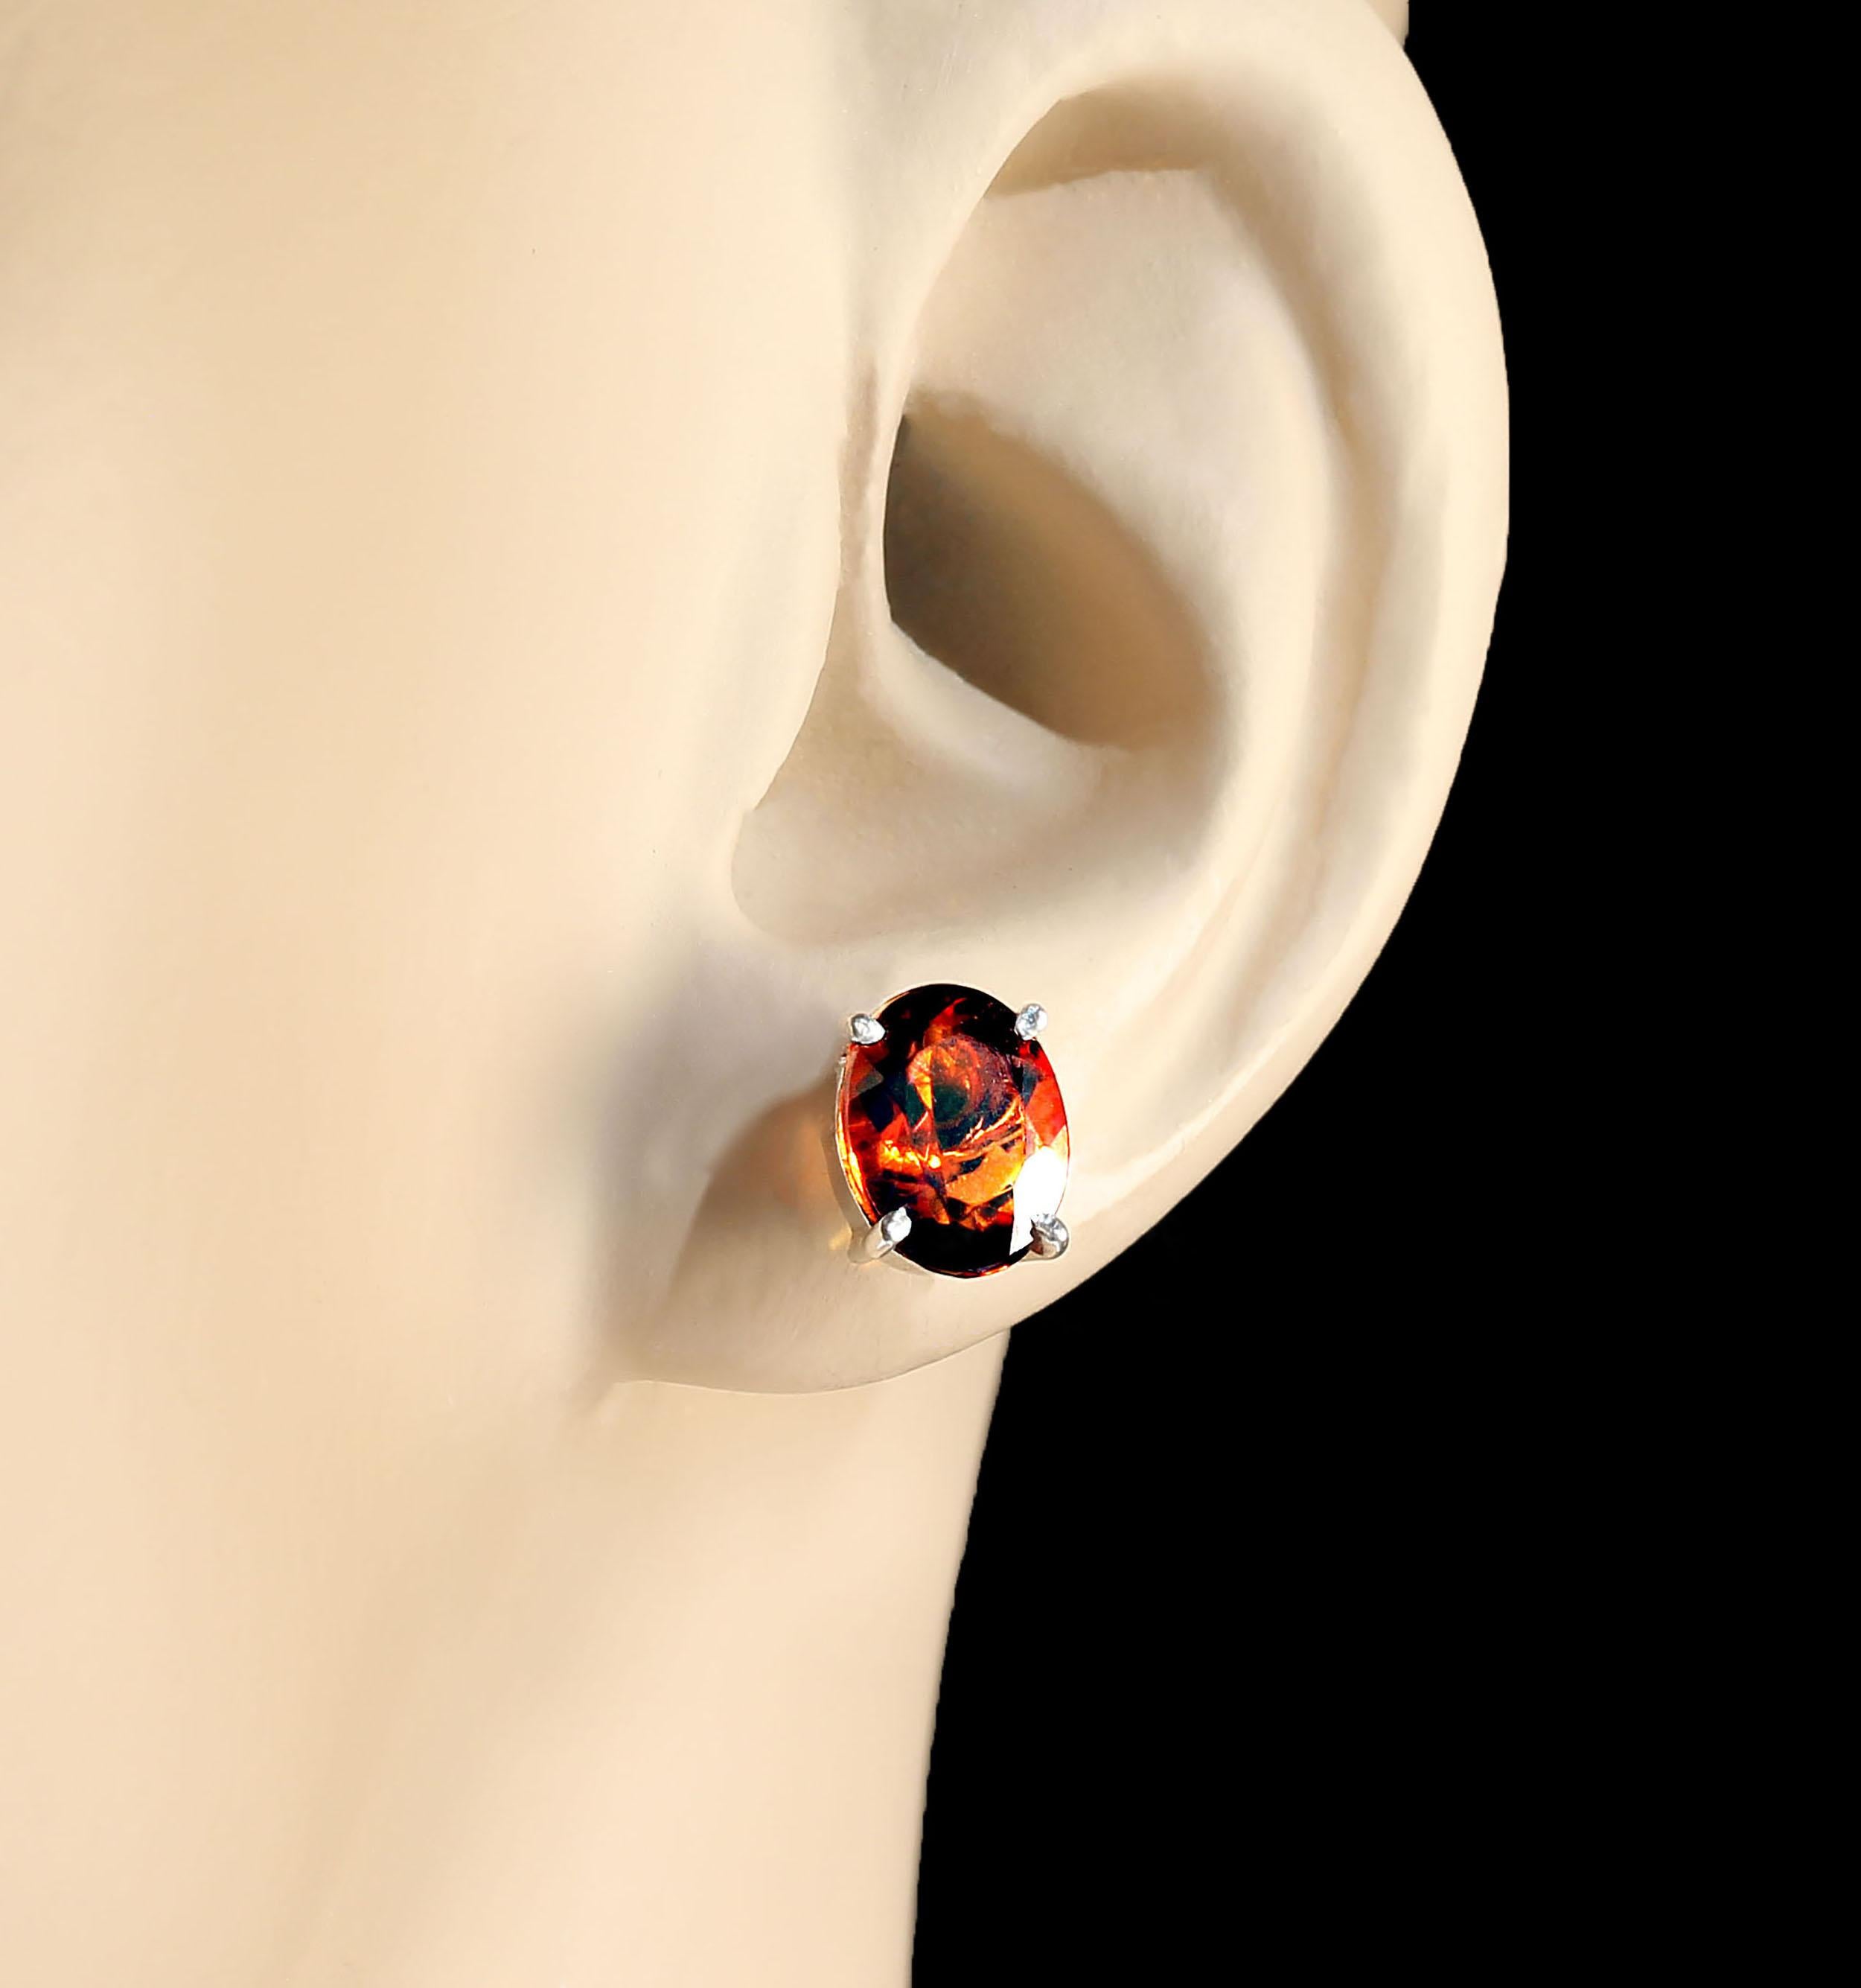 Sparkling oval, 9 x 7 MM, golden brown Citrines in four prong Sterling Silver stud settings. These versatile earrings are perfect for daily wear as well are evening sparkle. Post and push backs.   ME2323